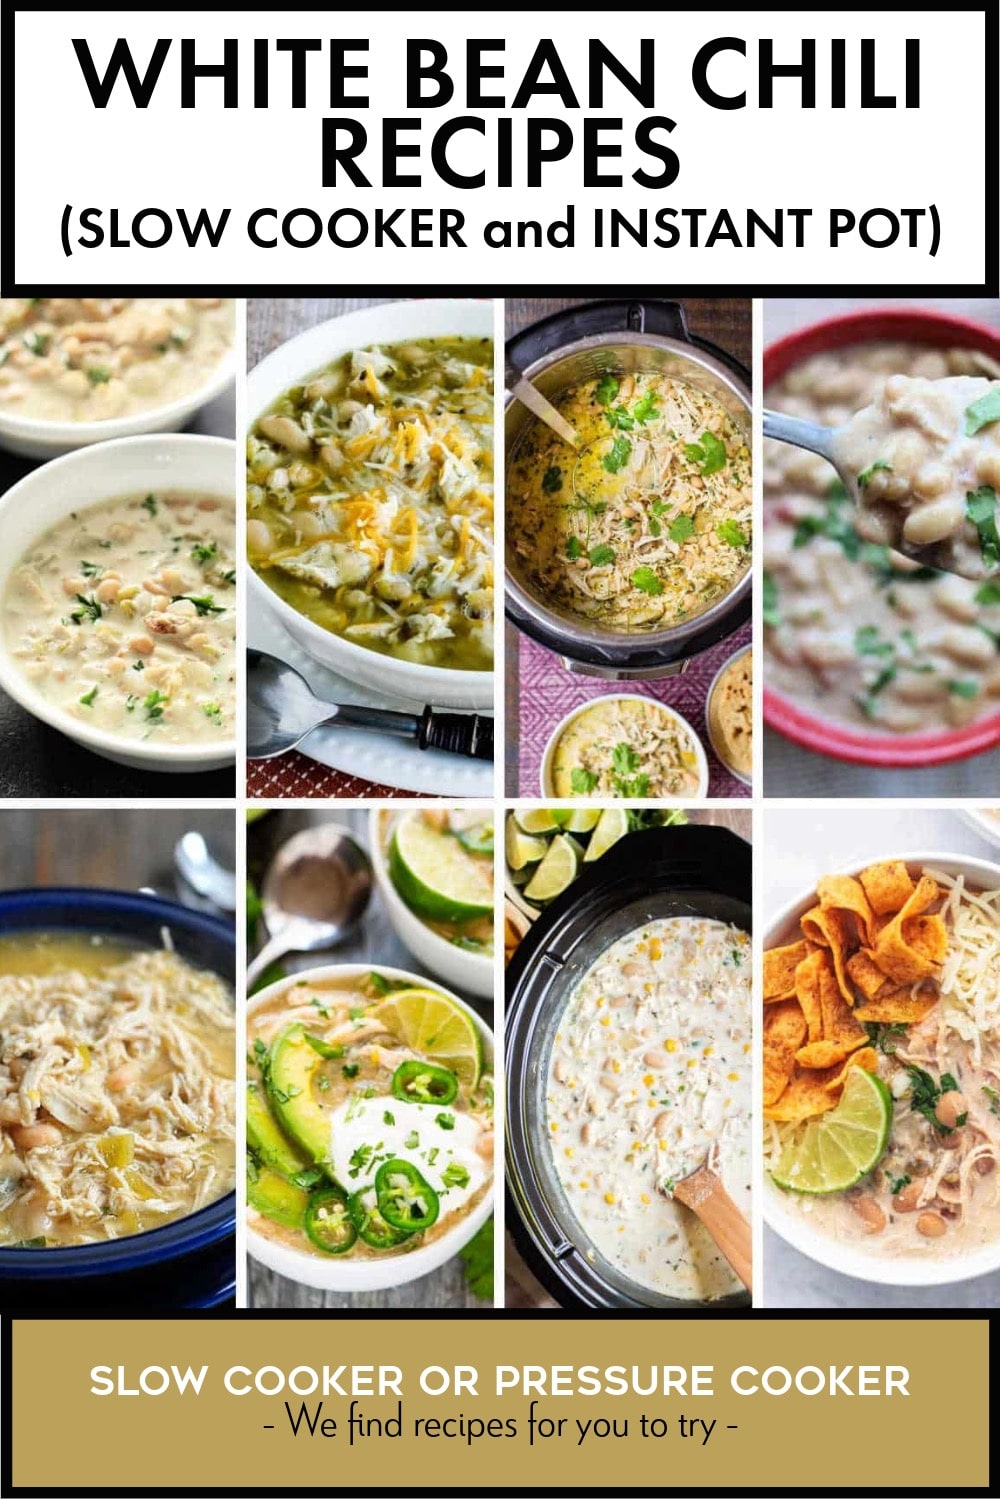 Pinterest image of White Bean Chili Recipes (Slow Cooker and Instant Pot)